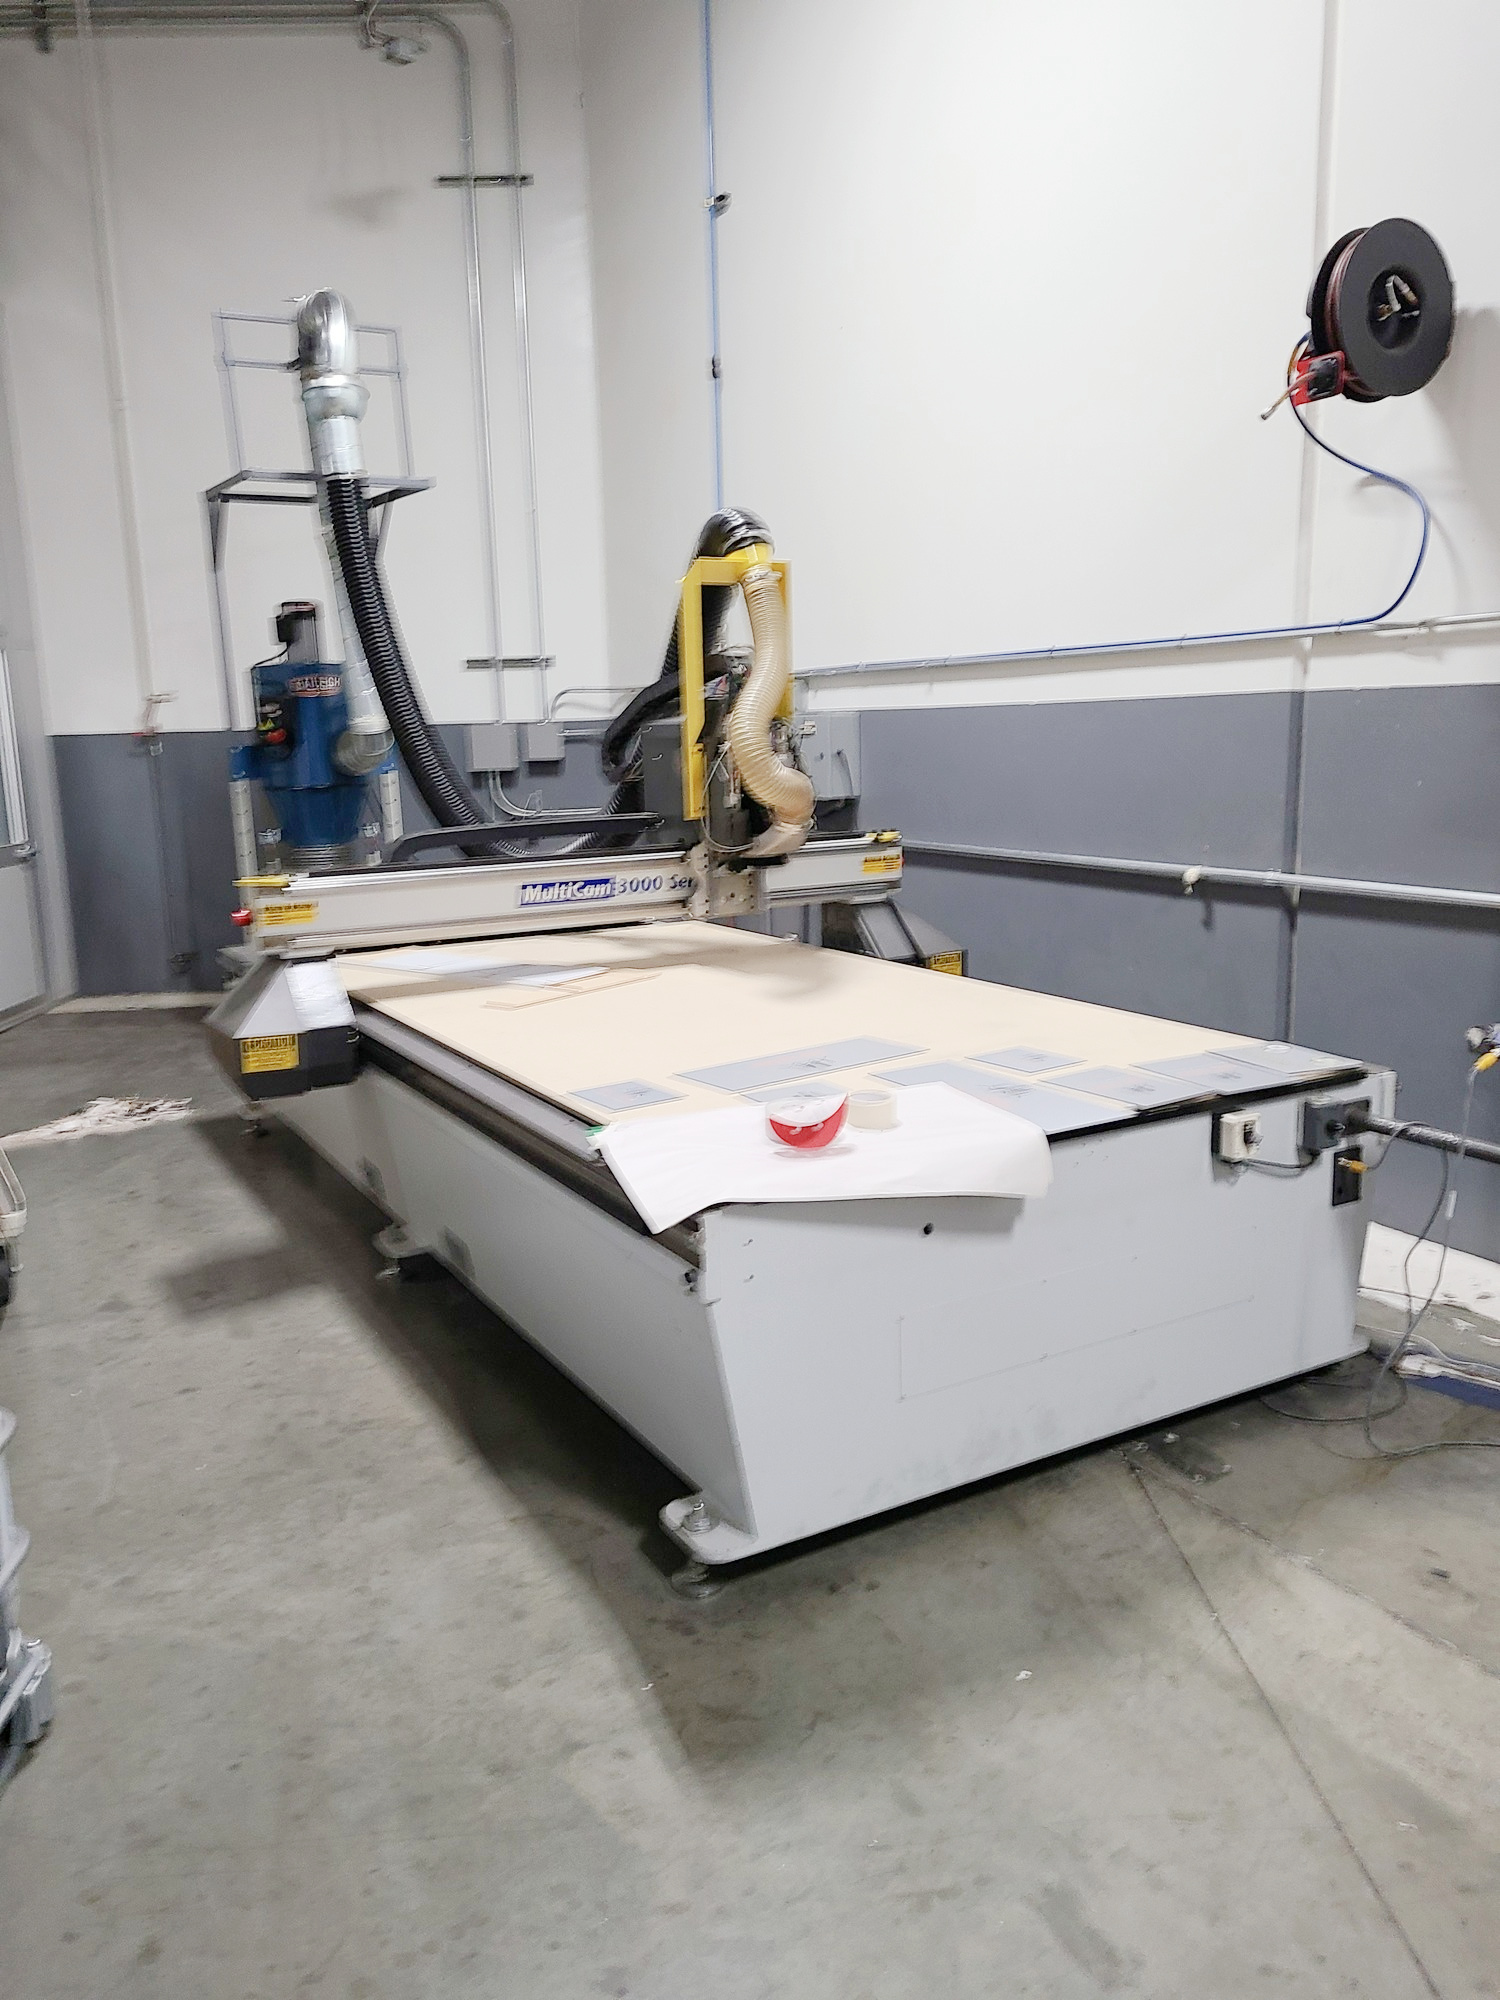 Multicam 3-204 CNC Router (used) Item # UE-081022A (New York)